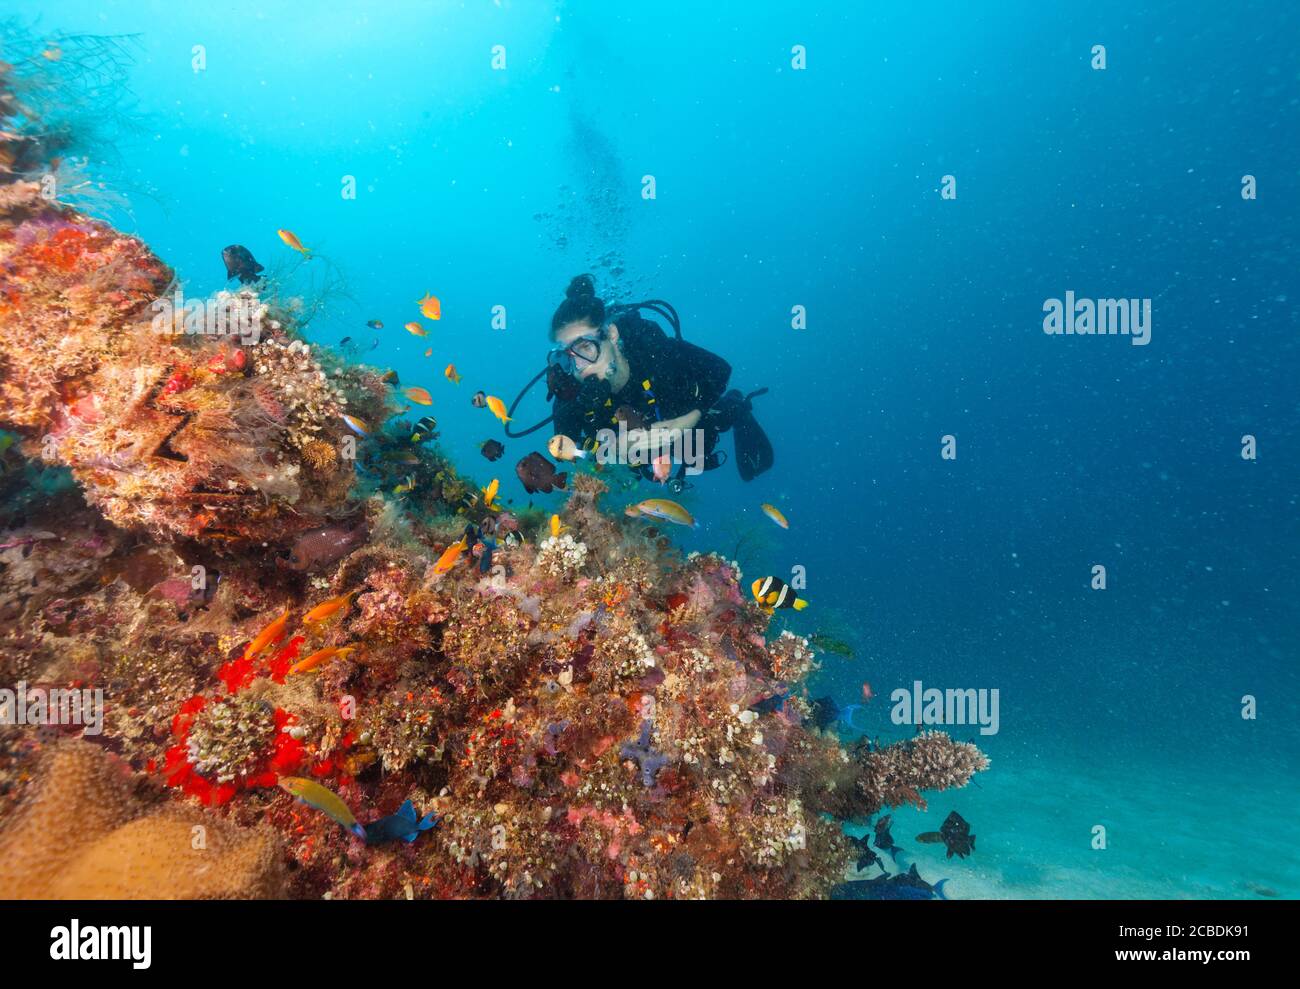 Young woman scuba diver exploring coral reef, underwater activities Stock Photo